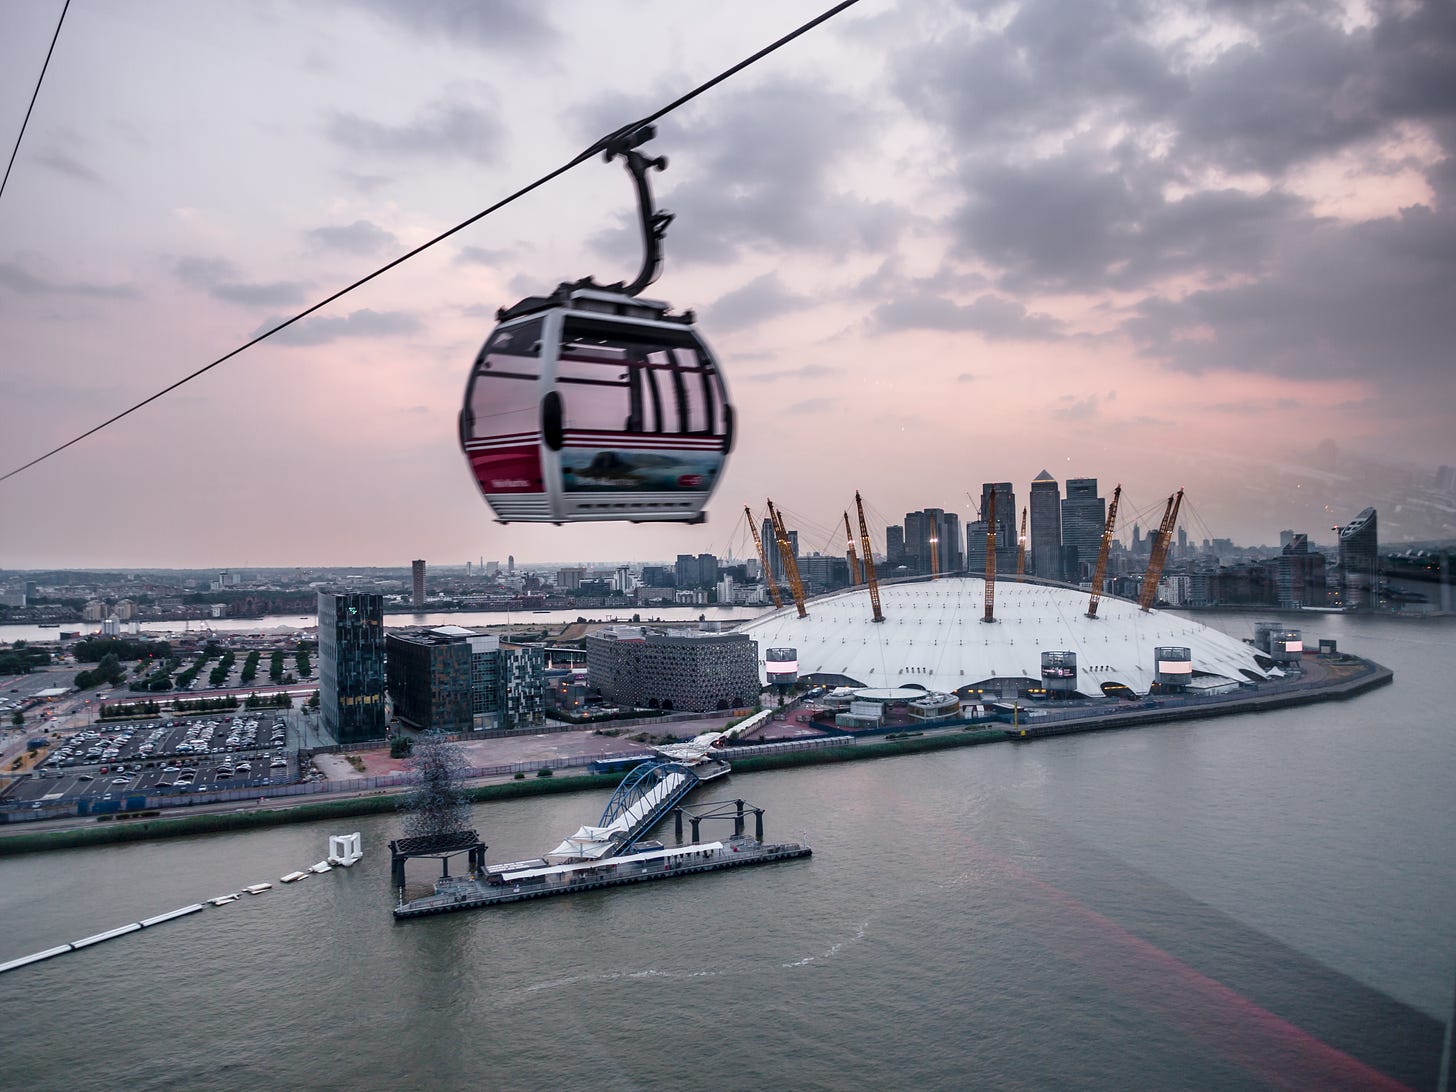 File:Thames Cable Car (9666405285).jpg - Wikimedia Commons